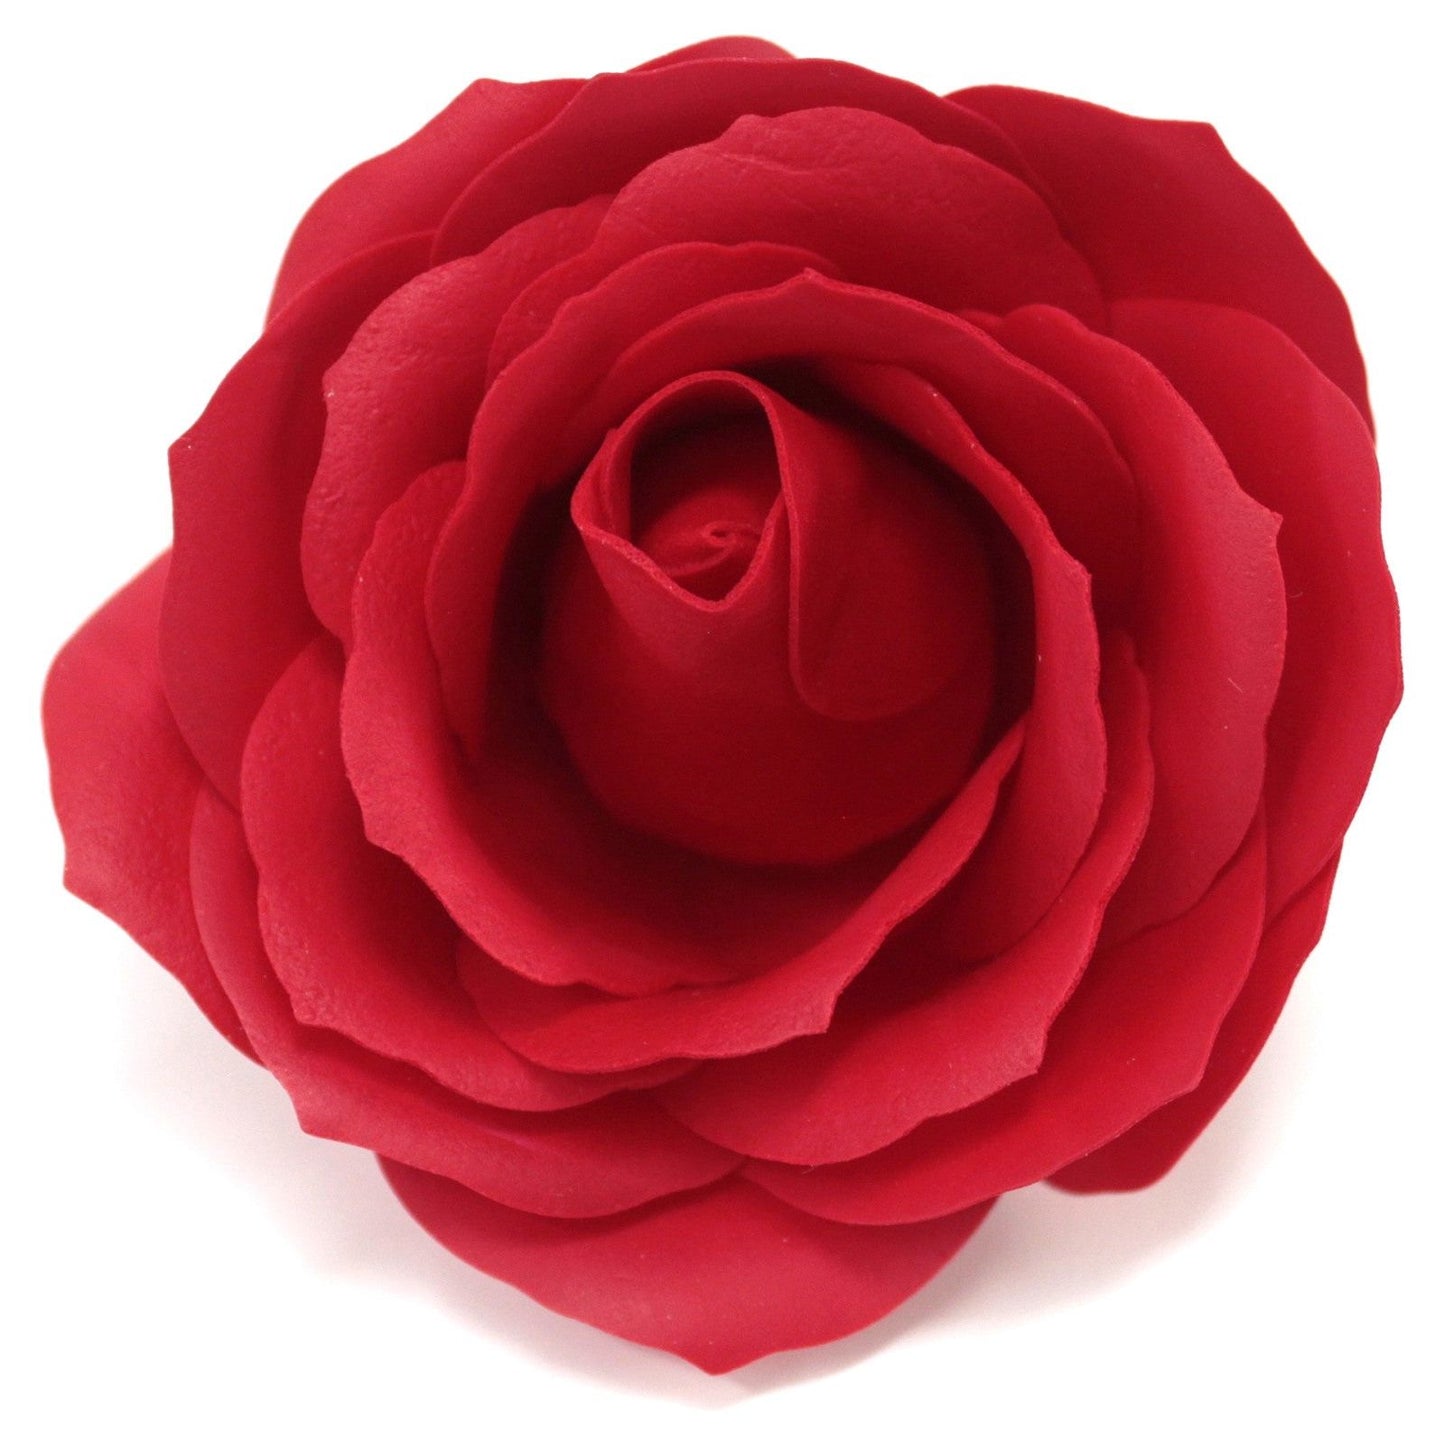 Craft Soap Flowers - Lrg Rose - Red x 10 - Ashton and Finch